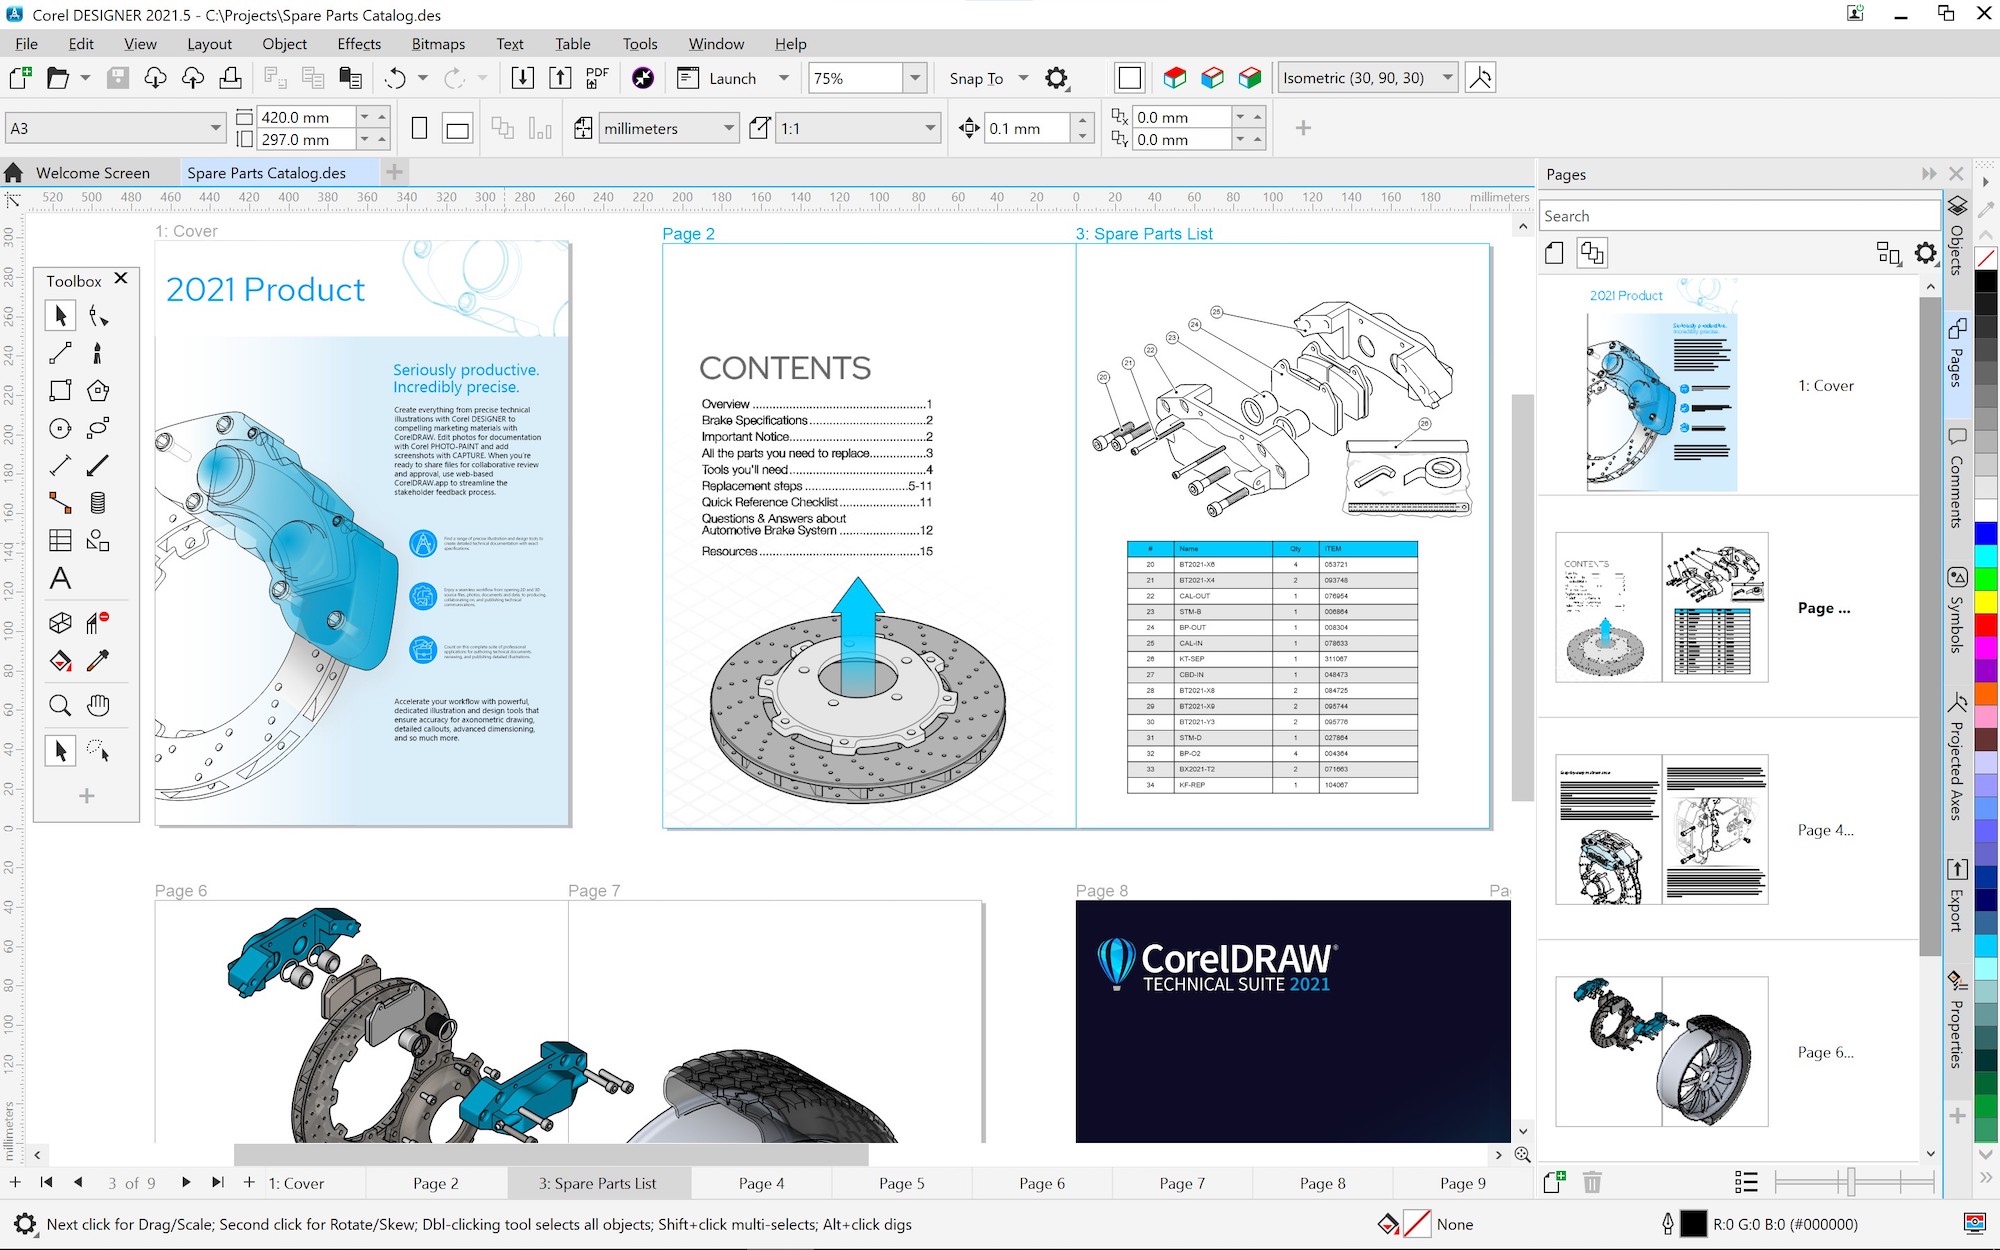 CorelDRAW Technical Suite 2021—Powerful Technical Illustration Connected to Industrial CAD